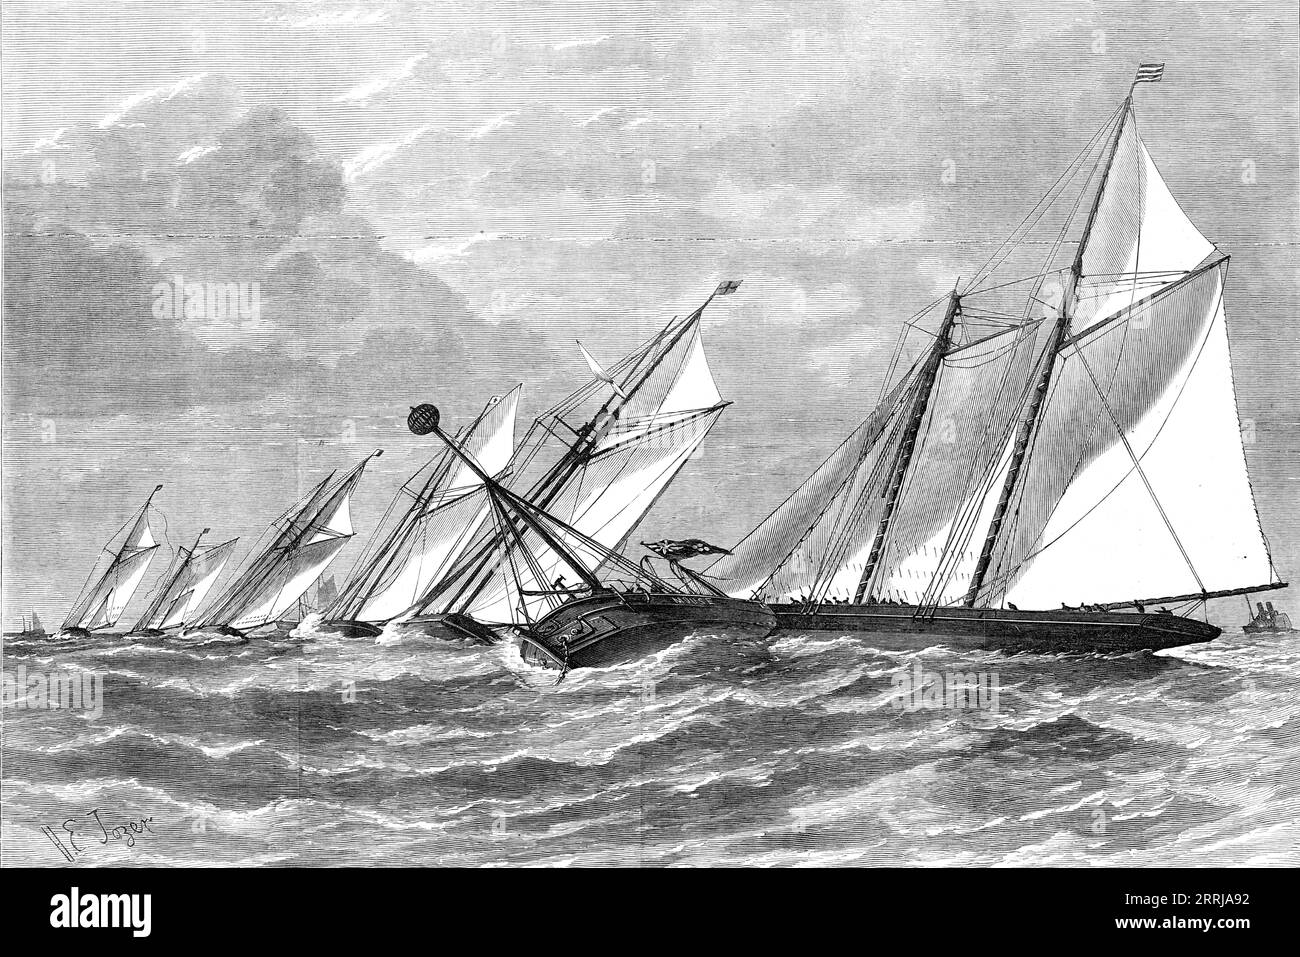 Schooner and Yawl Match of the Royal Thames Yacht Club last Saturday: the Pantomine fouling the Mouse Light-Vessel, 1876. 'There was a very fine wind for the schooner and yawl matches of this club, sailed on Saturday last, from Gravesend round the Mouse Light-Ship and back...The Pantomime (151 tons, Mr. J. Starkey) made her first appearance in a match since lengthening 4 ft. by the stern. She did not appear to be improved as far as speed goes and, by some awkwardness, she sailed plump into the Mouse Light-Ship and got crippled... The Pantomime took more scope than the others for her gybe, and, Stock Photo